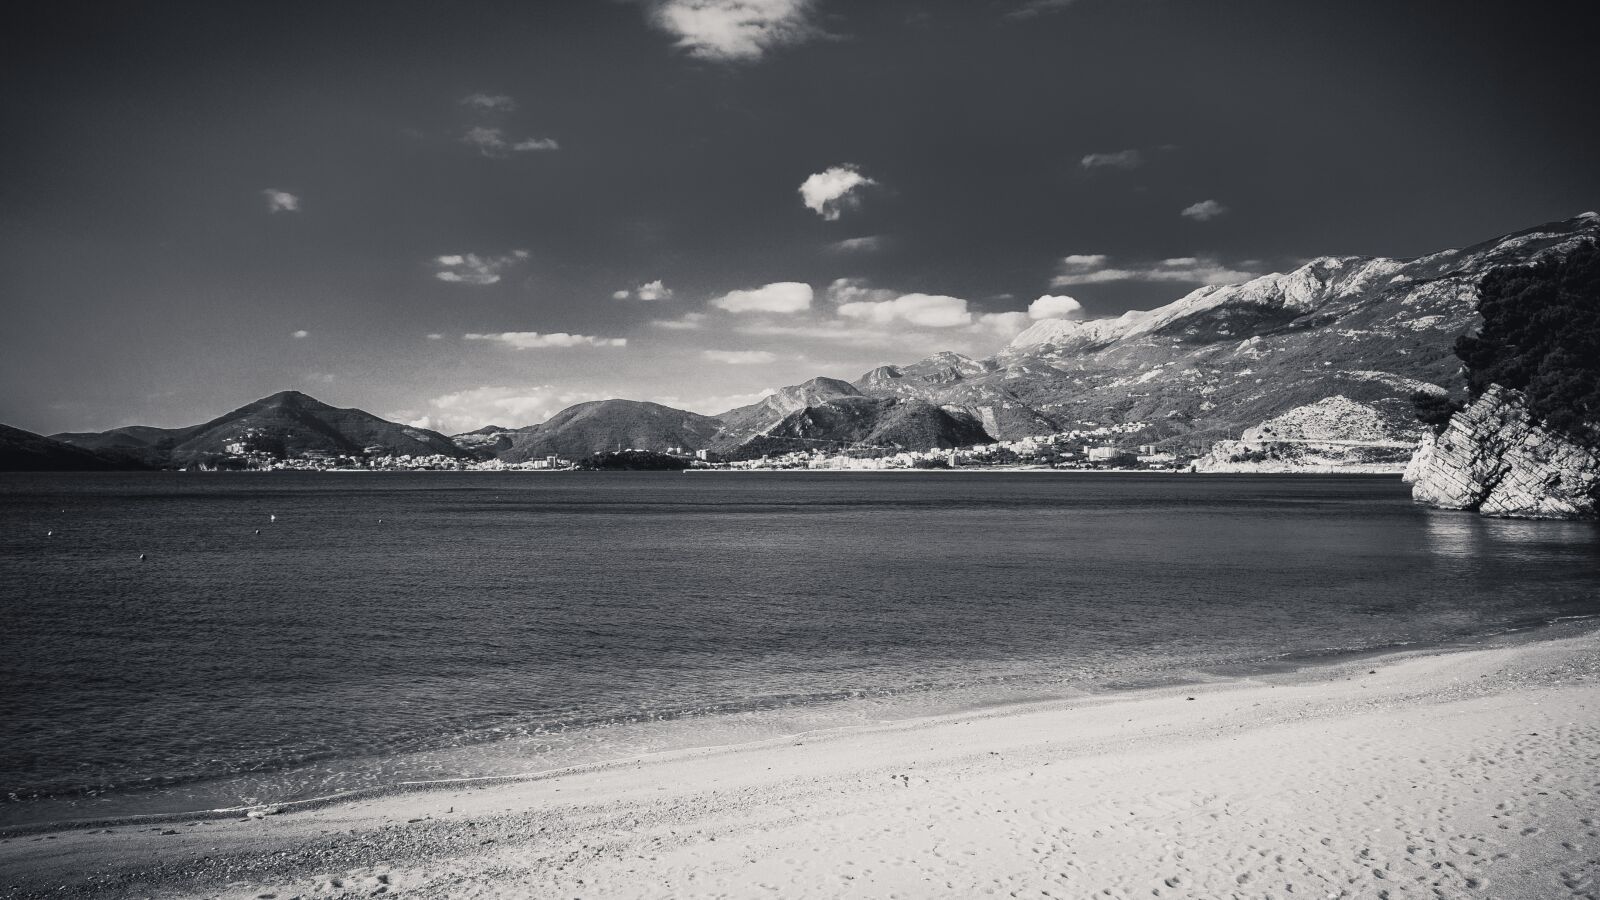 Nokia 808 PureView sample photo. Beach, black and white photography